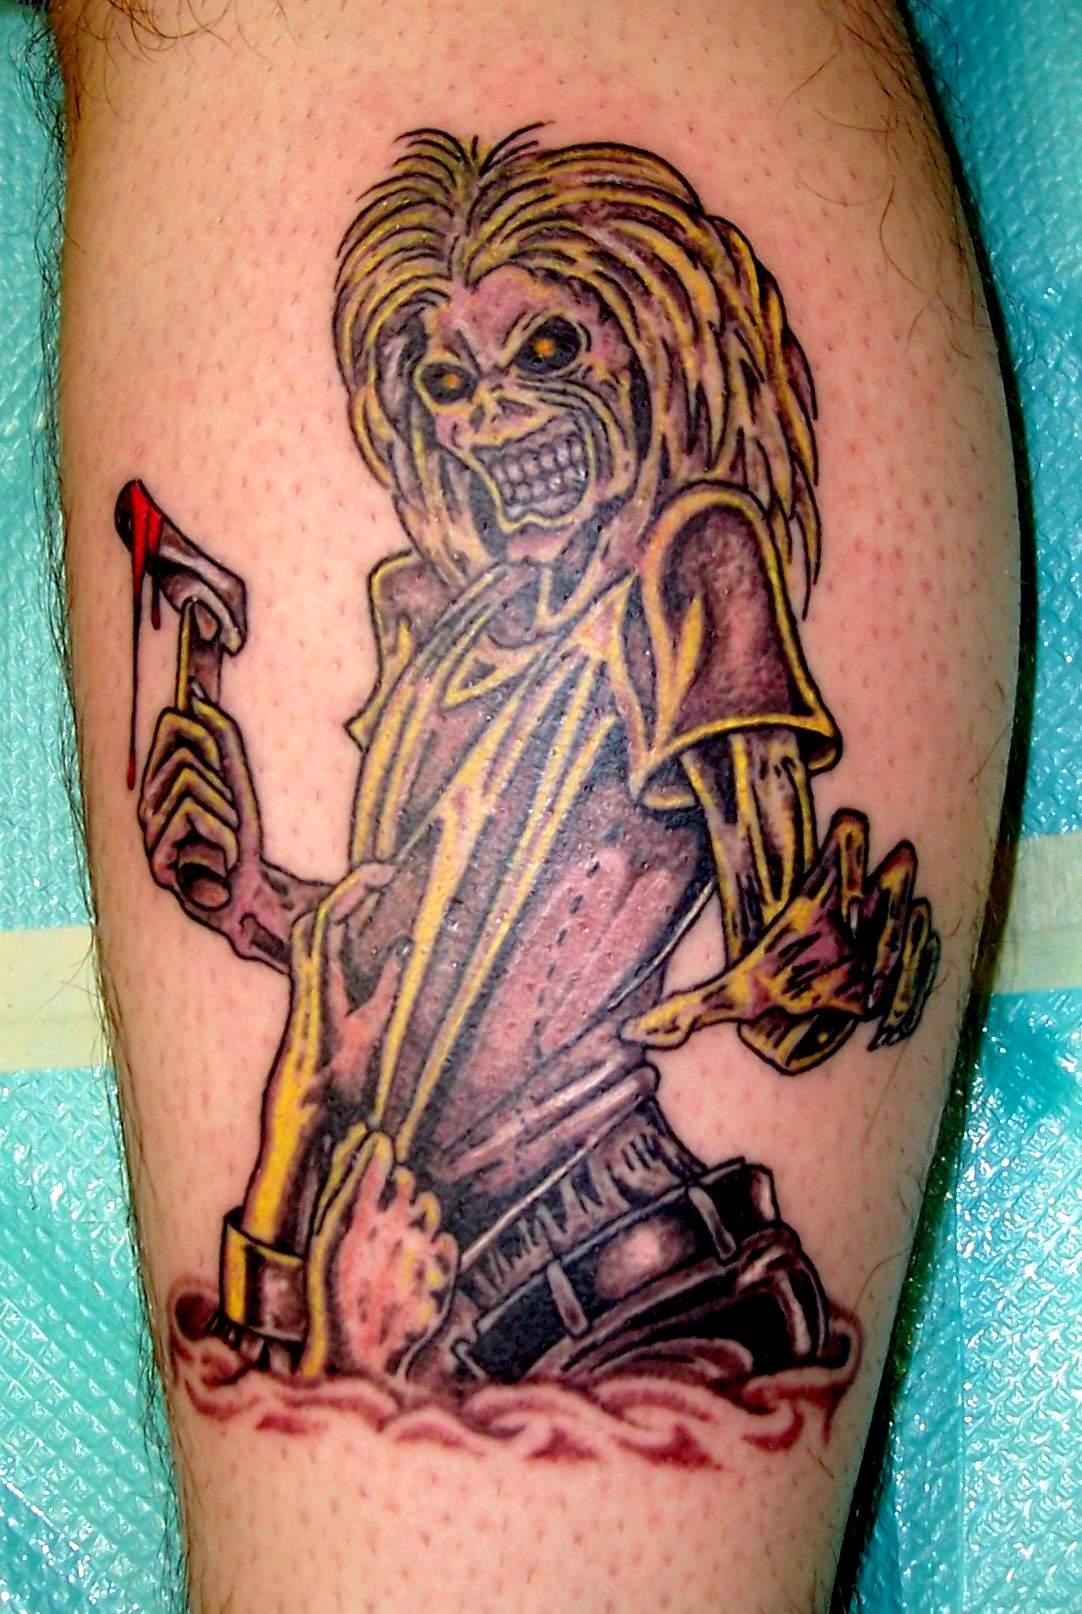 Iron Maiden fans we have a few tattoo designs just for you